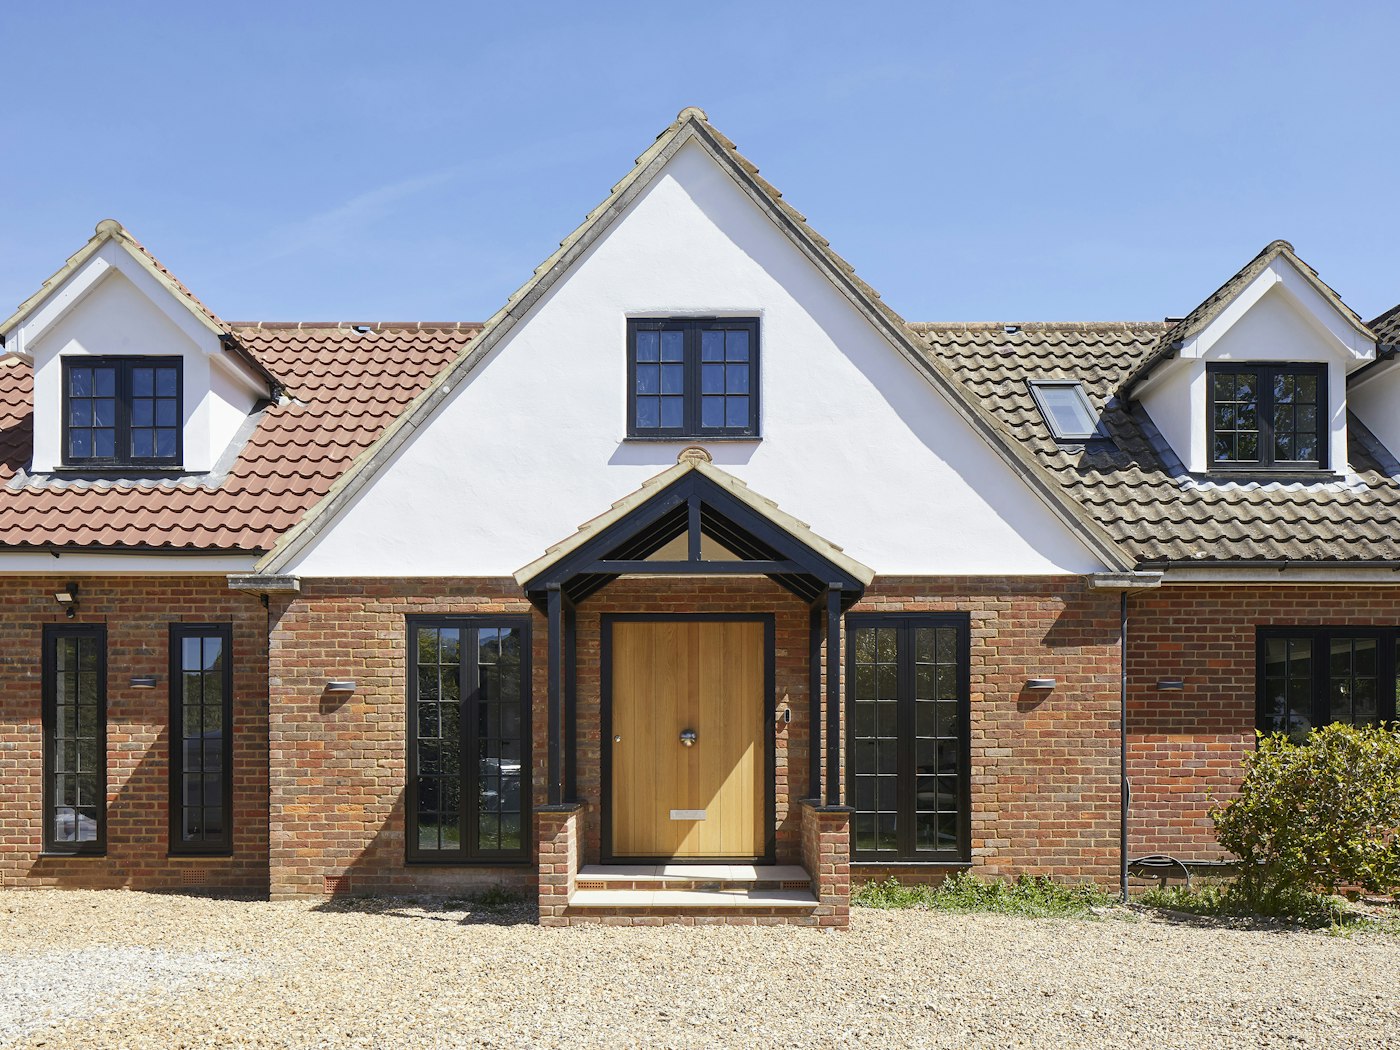 European oak works fantastically well with red brick and white render